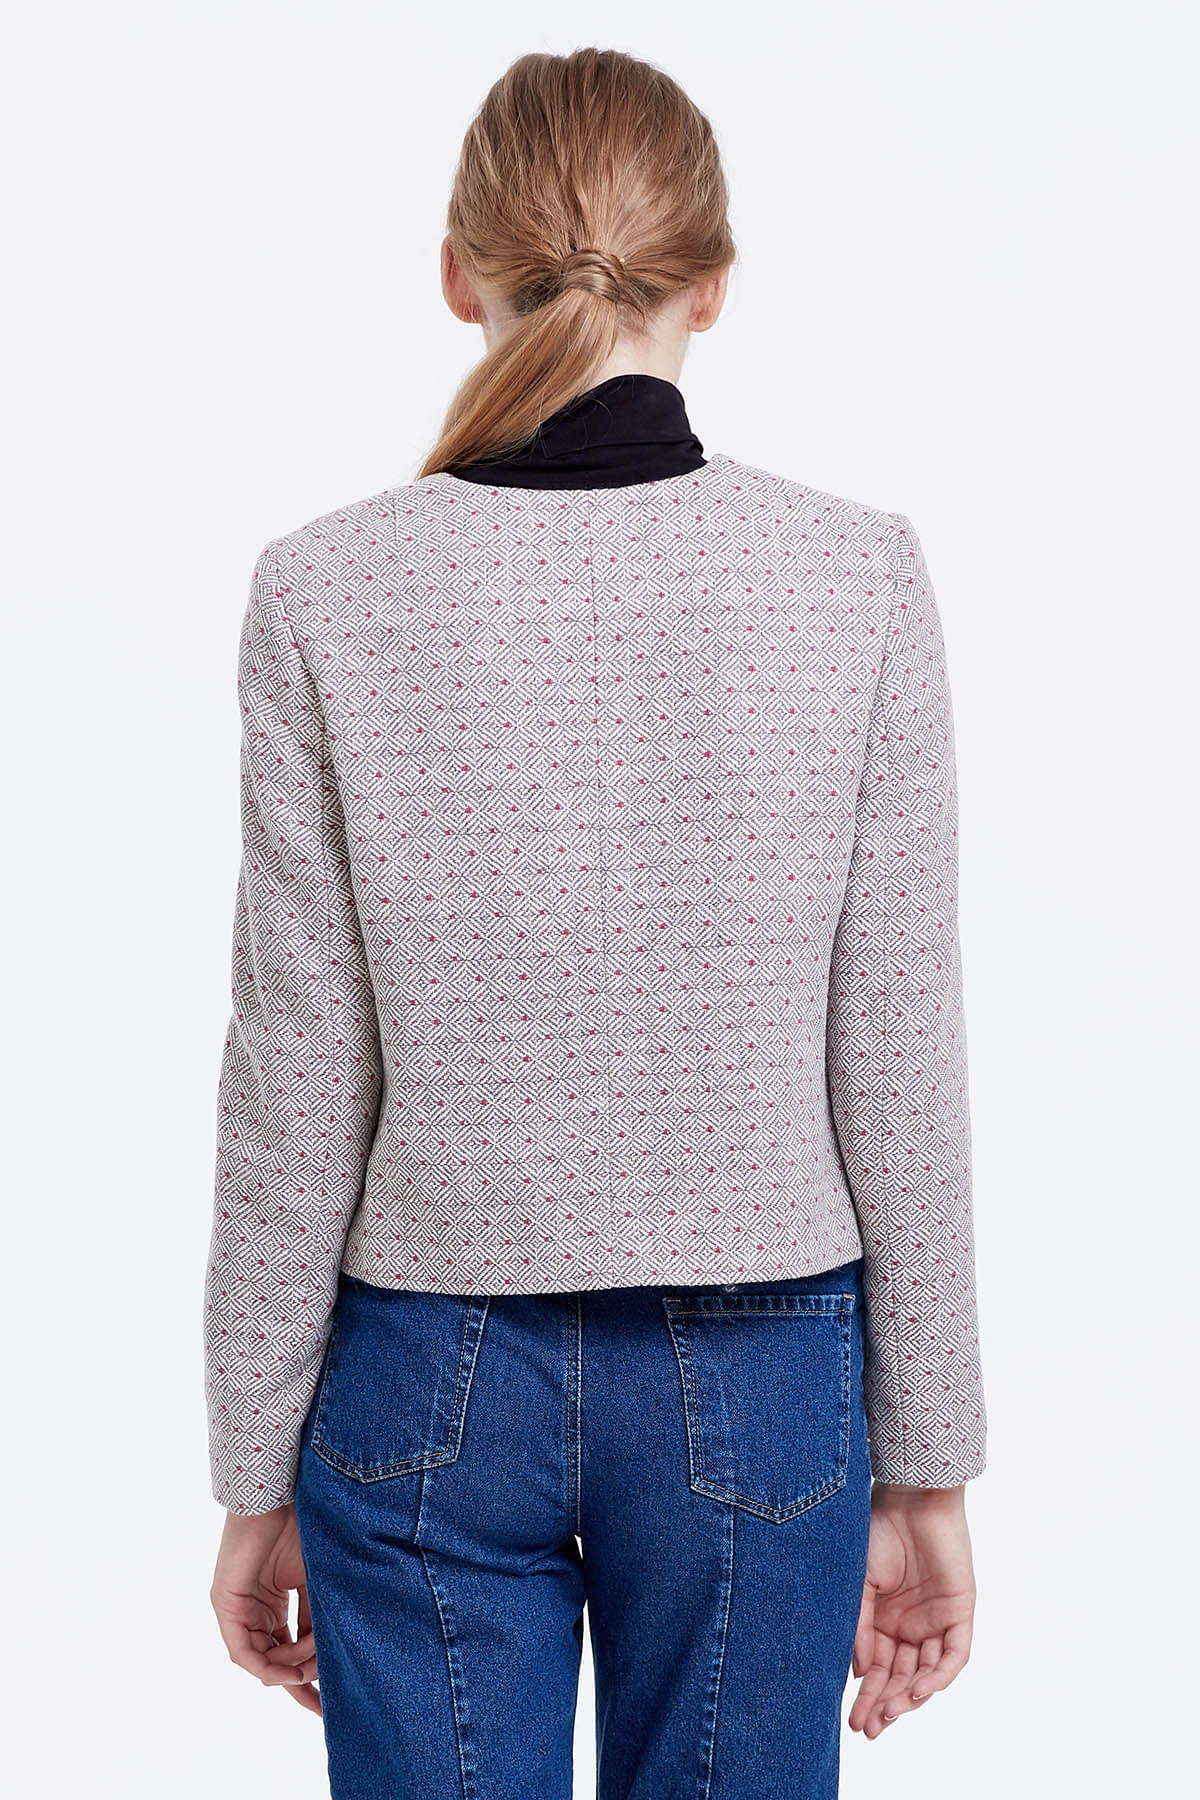 Short grey jacket with rhombs and pink dots , photo 2